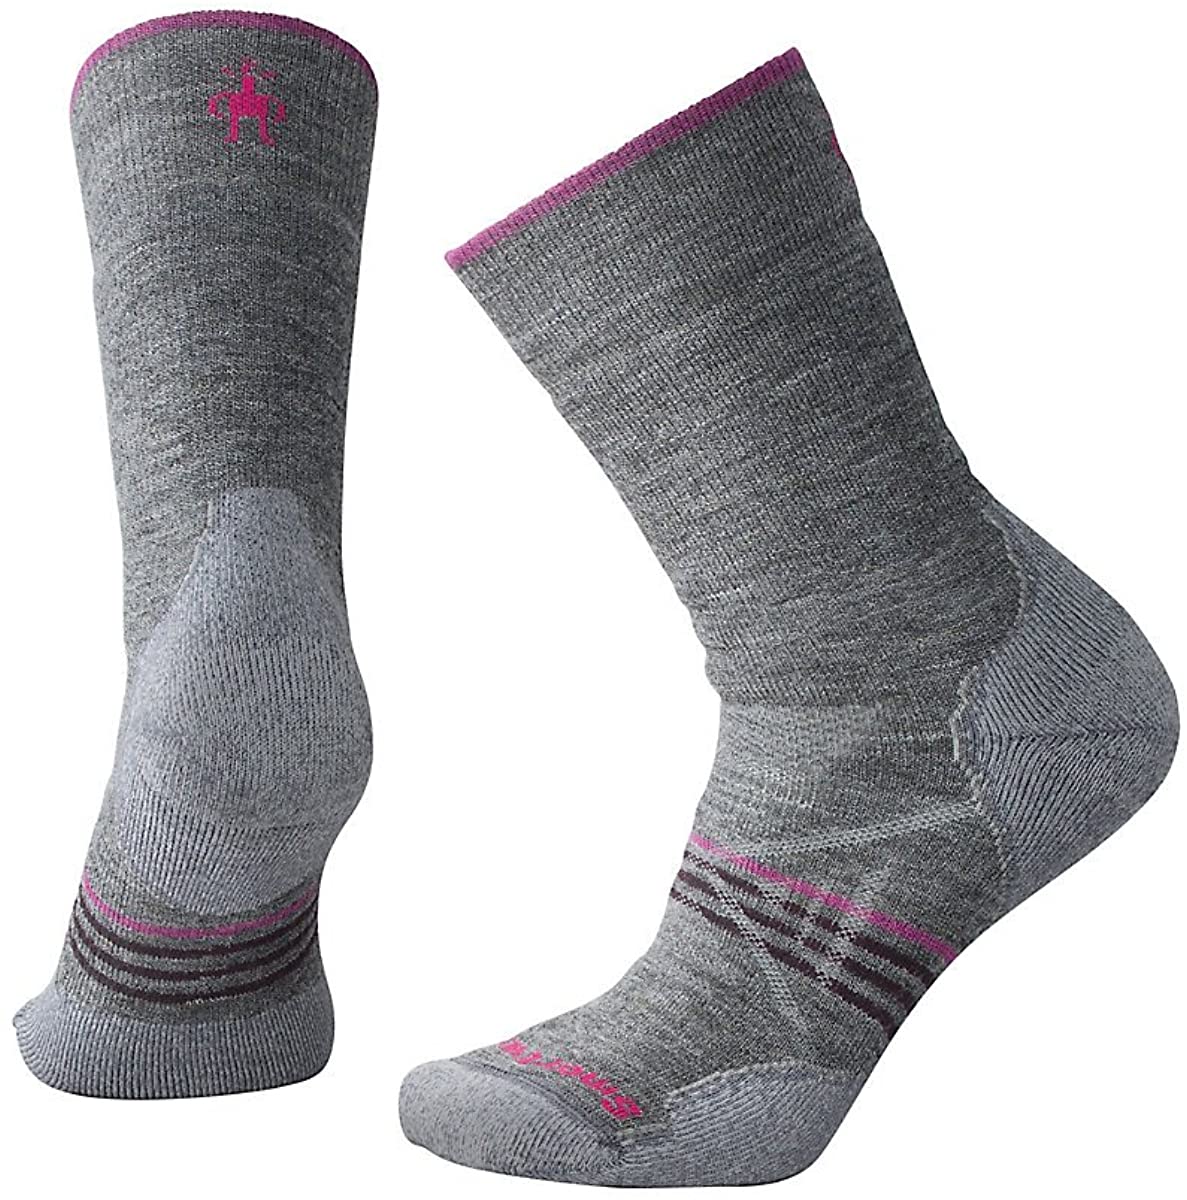 Women's Smartwool PhD Outdoor Medium Hiking Crew Socks in Medium Gray color from the side view